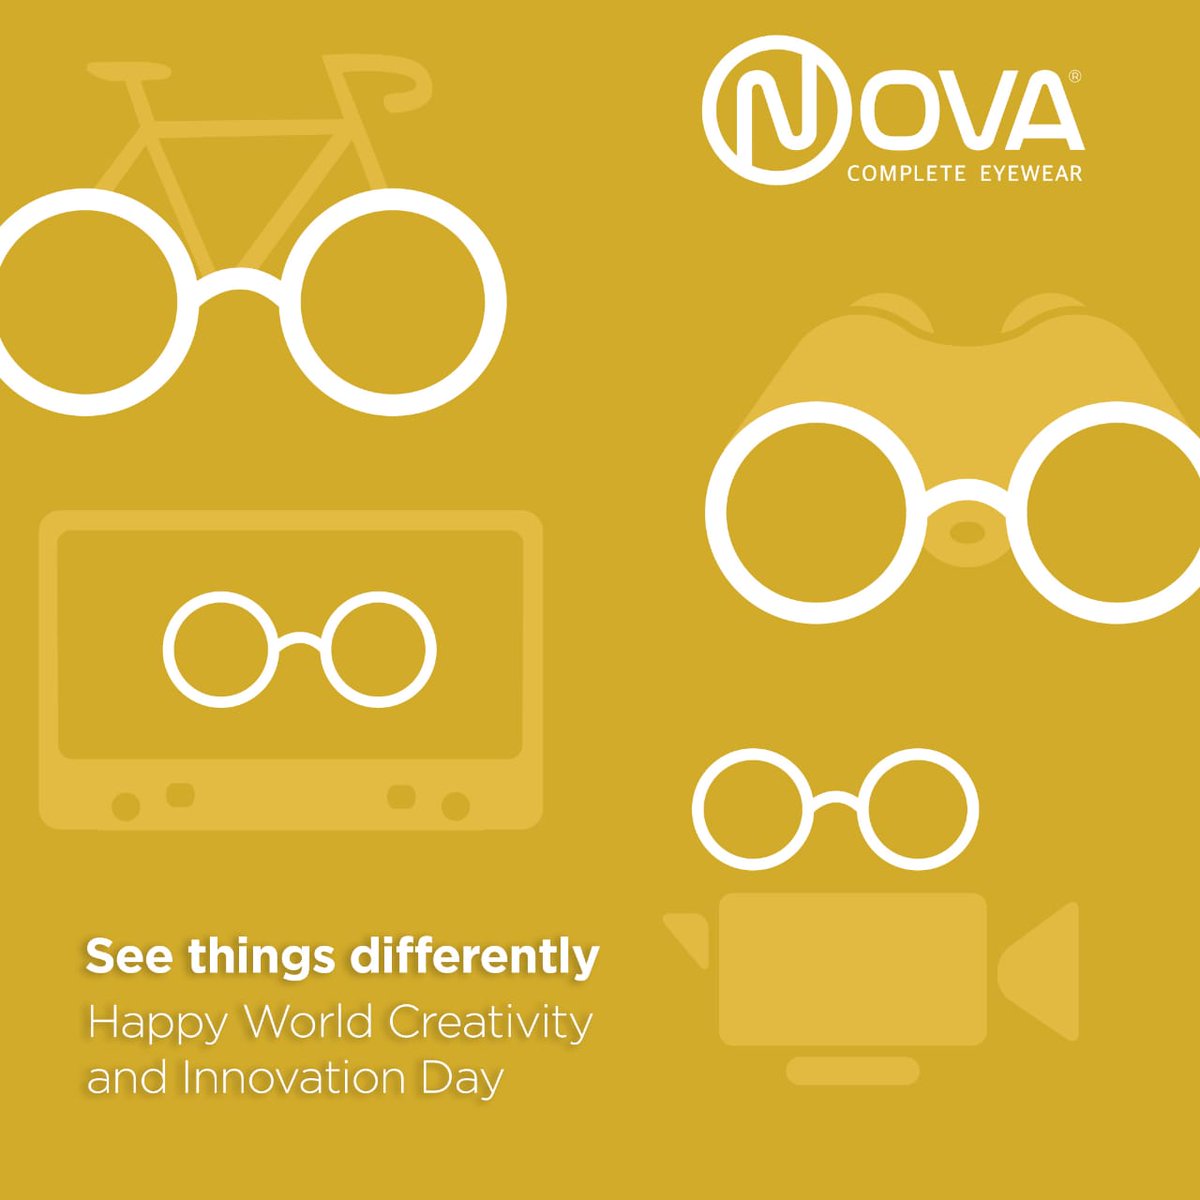 A different perspective for a creative route. 
Celebrate World Creativity and Innovation Day for the innovator you are.
#NovaEyewear #CompleteEyewear #HappyWorldCreativityAndInnovationDay
#InnovatorsOfTheWorld #Creativity #Inventors #Innovation